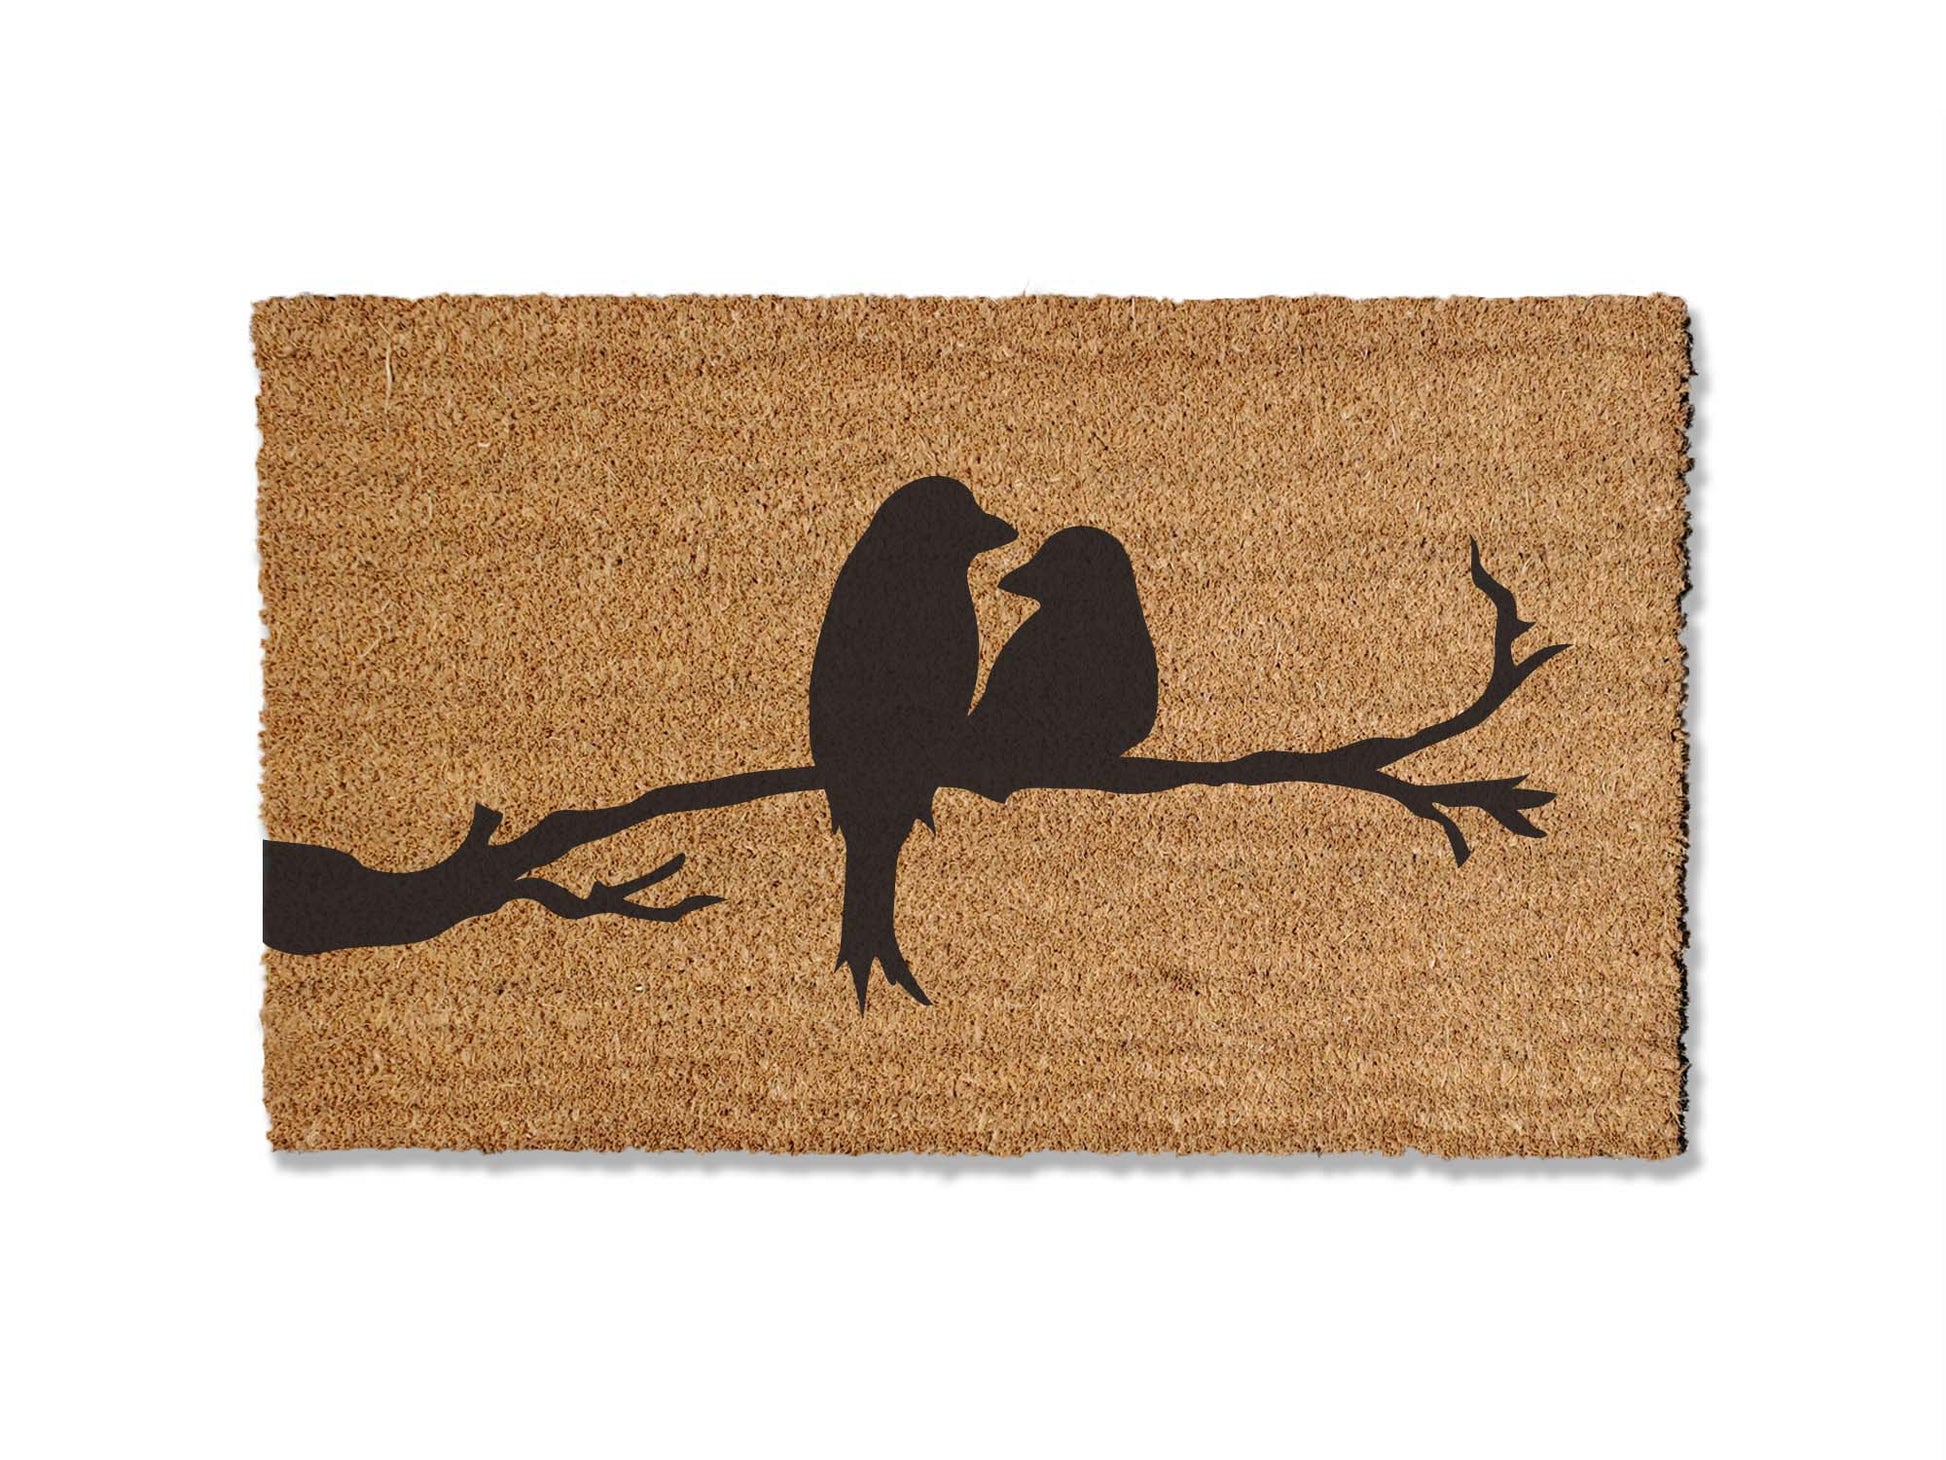 Personalized 1/2 inch thick coir doormat featuring a custom design of birds on a branch, with the option to add your house numbers on the birds. This unique mat not only adds a personalized touch to your entryway but also excels at trapping dirt, enhancing both style and functionality.